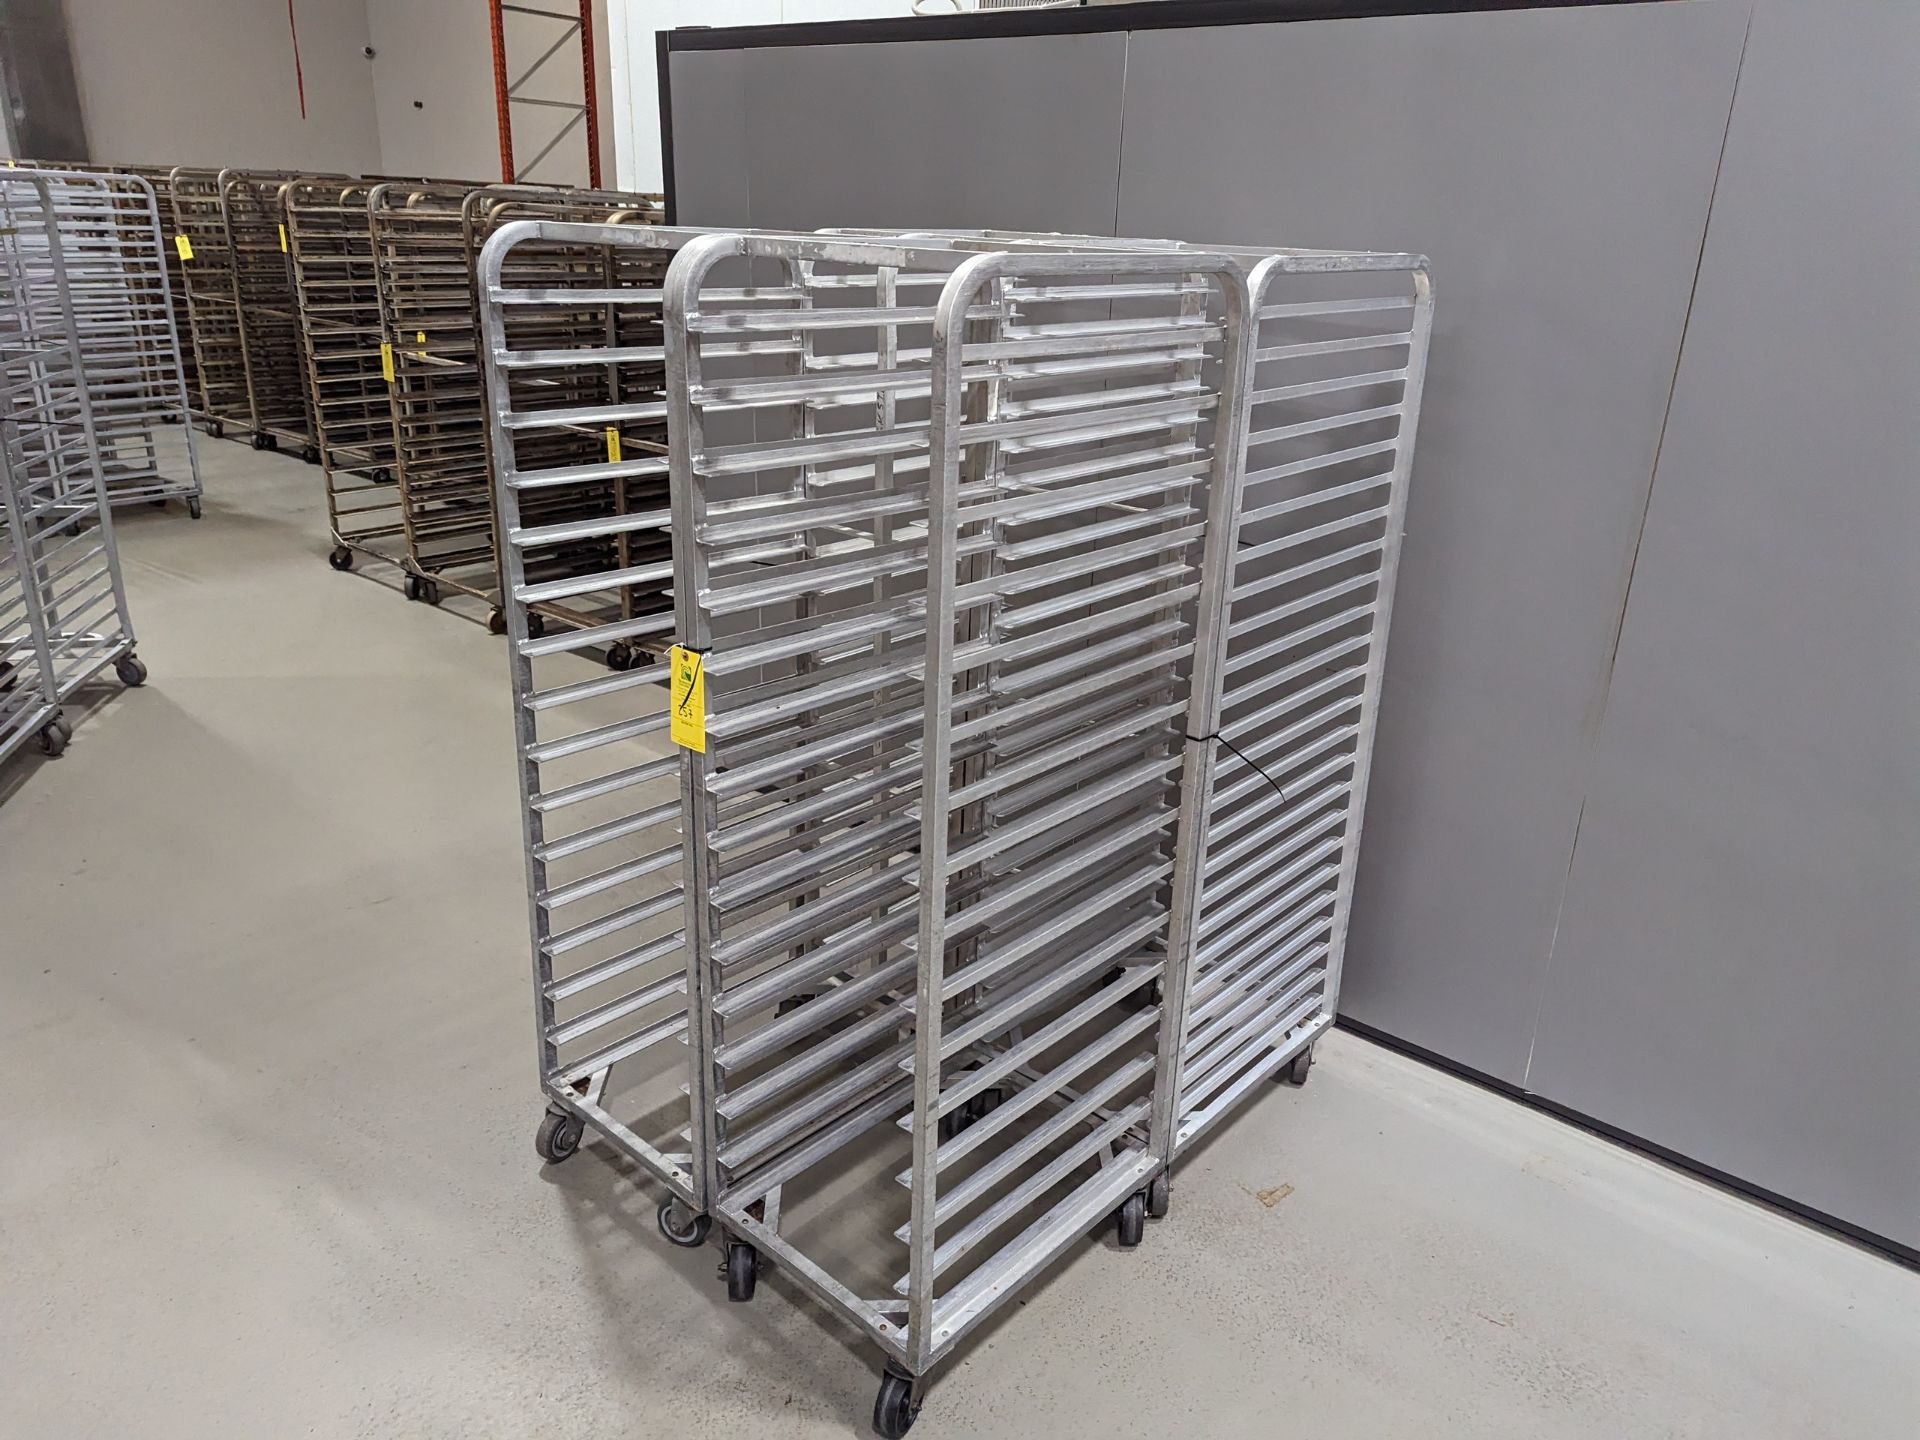 Lot of 4 Single Wide Aluminum Bakery Racks, Dimensions LxWxH: 53x41x69 Measurements are for lot of - Image 2 of 6